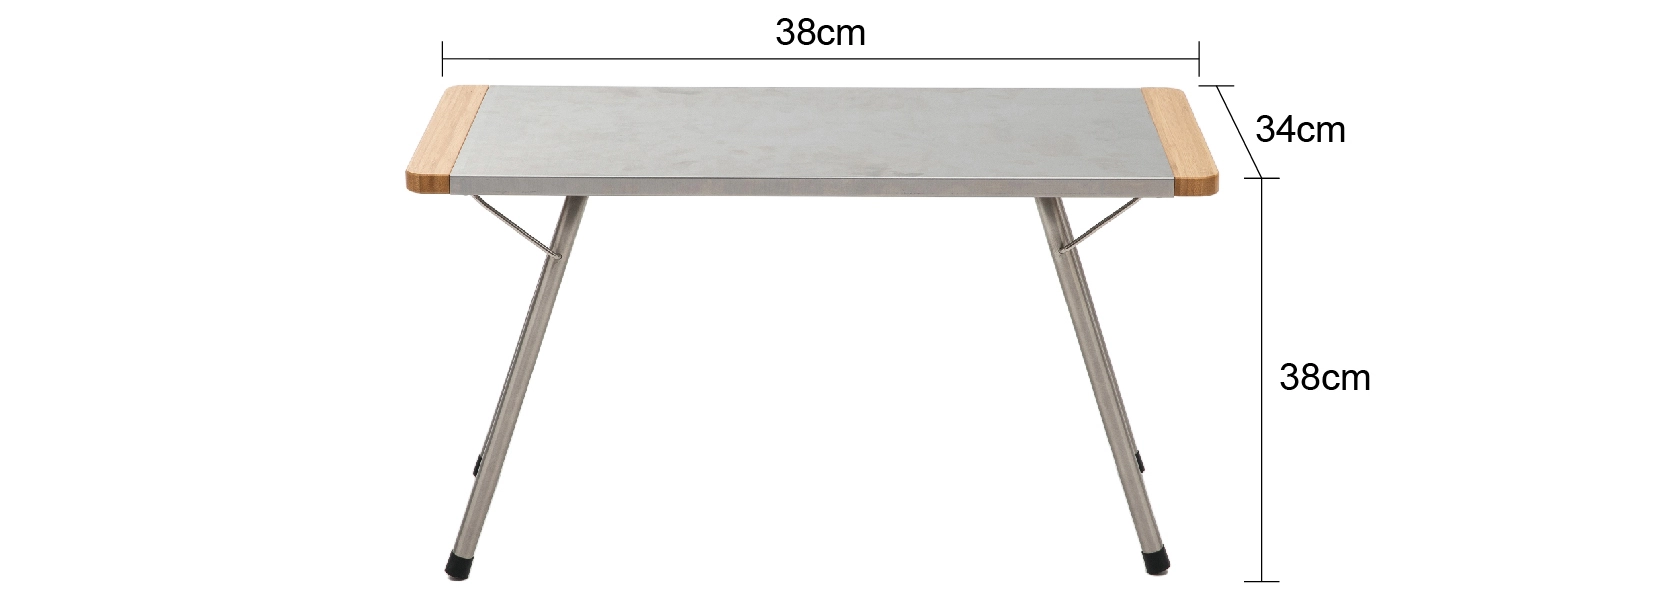 details of Stainless Steel Camping Table